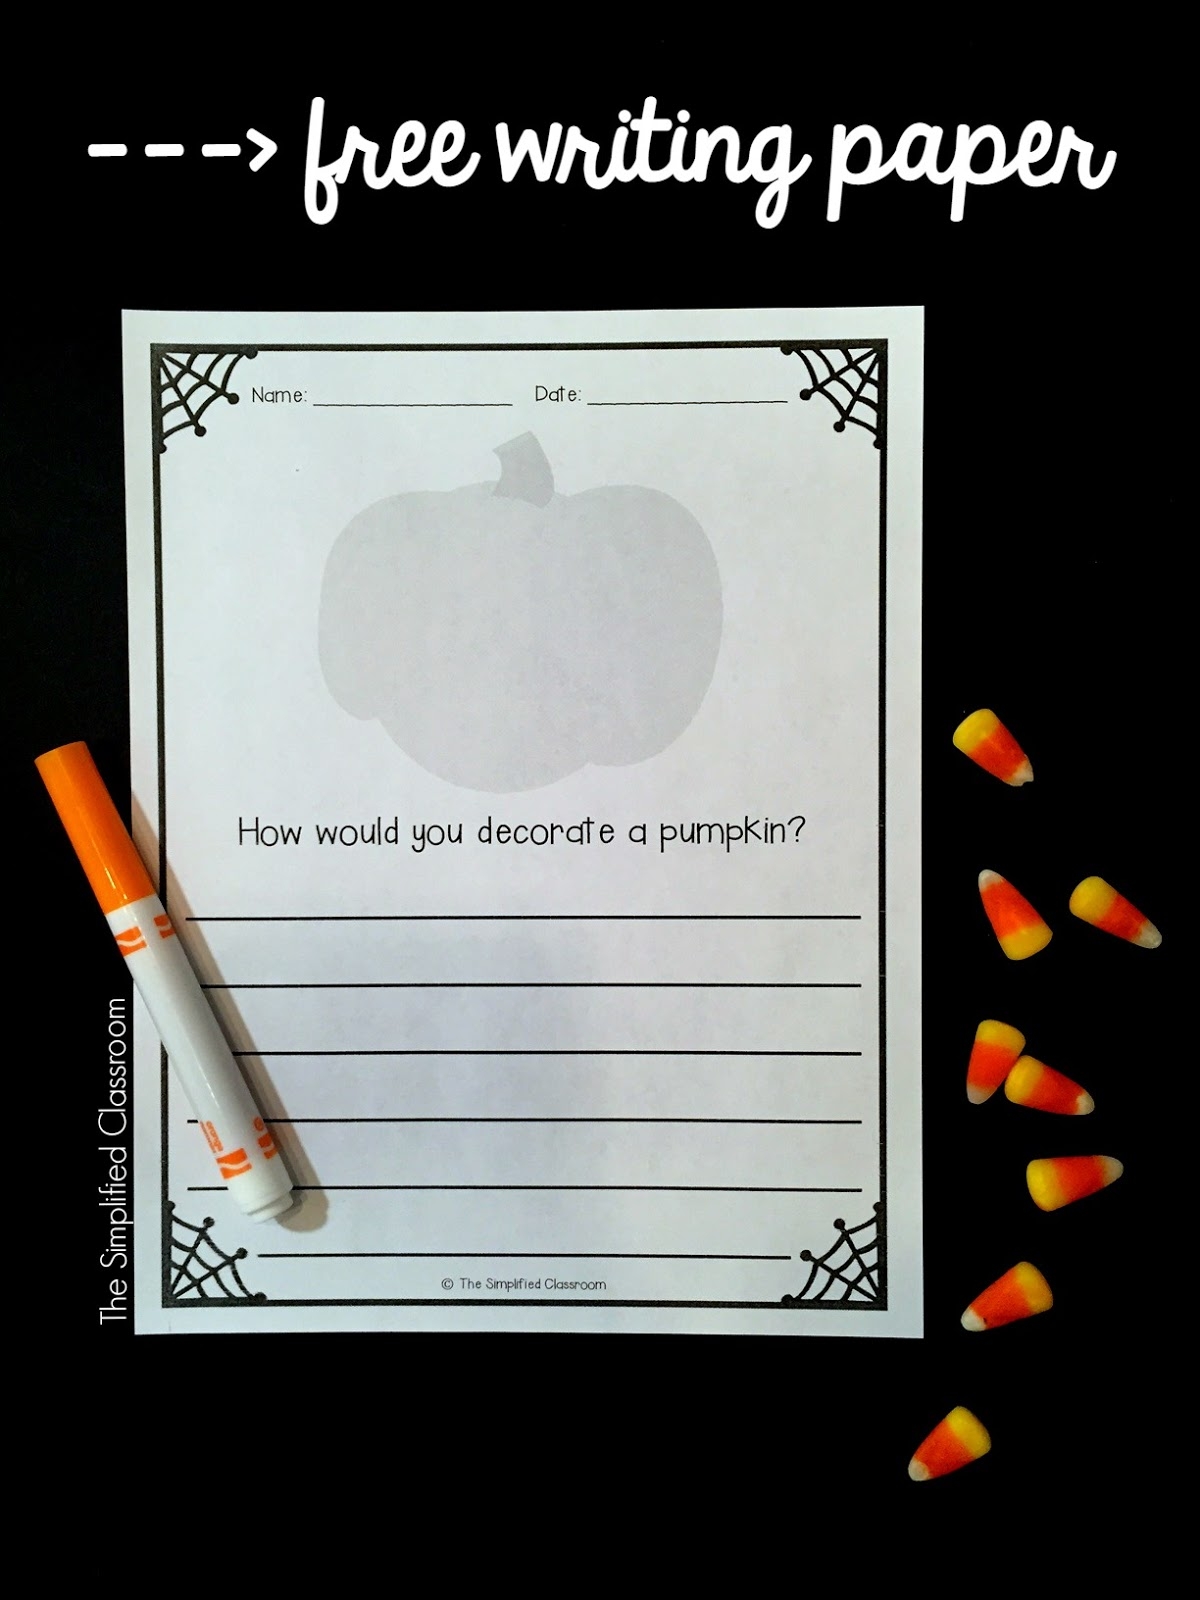 Free Pumpkin Writing Paper The Simplified Classroom